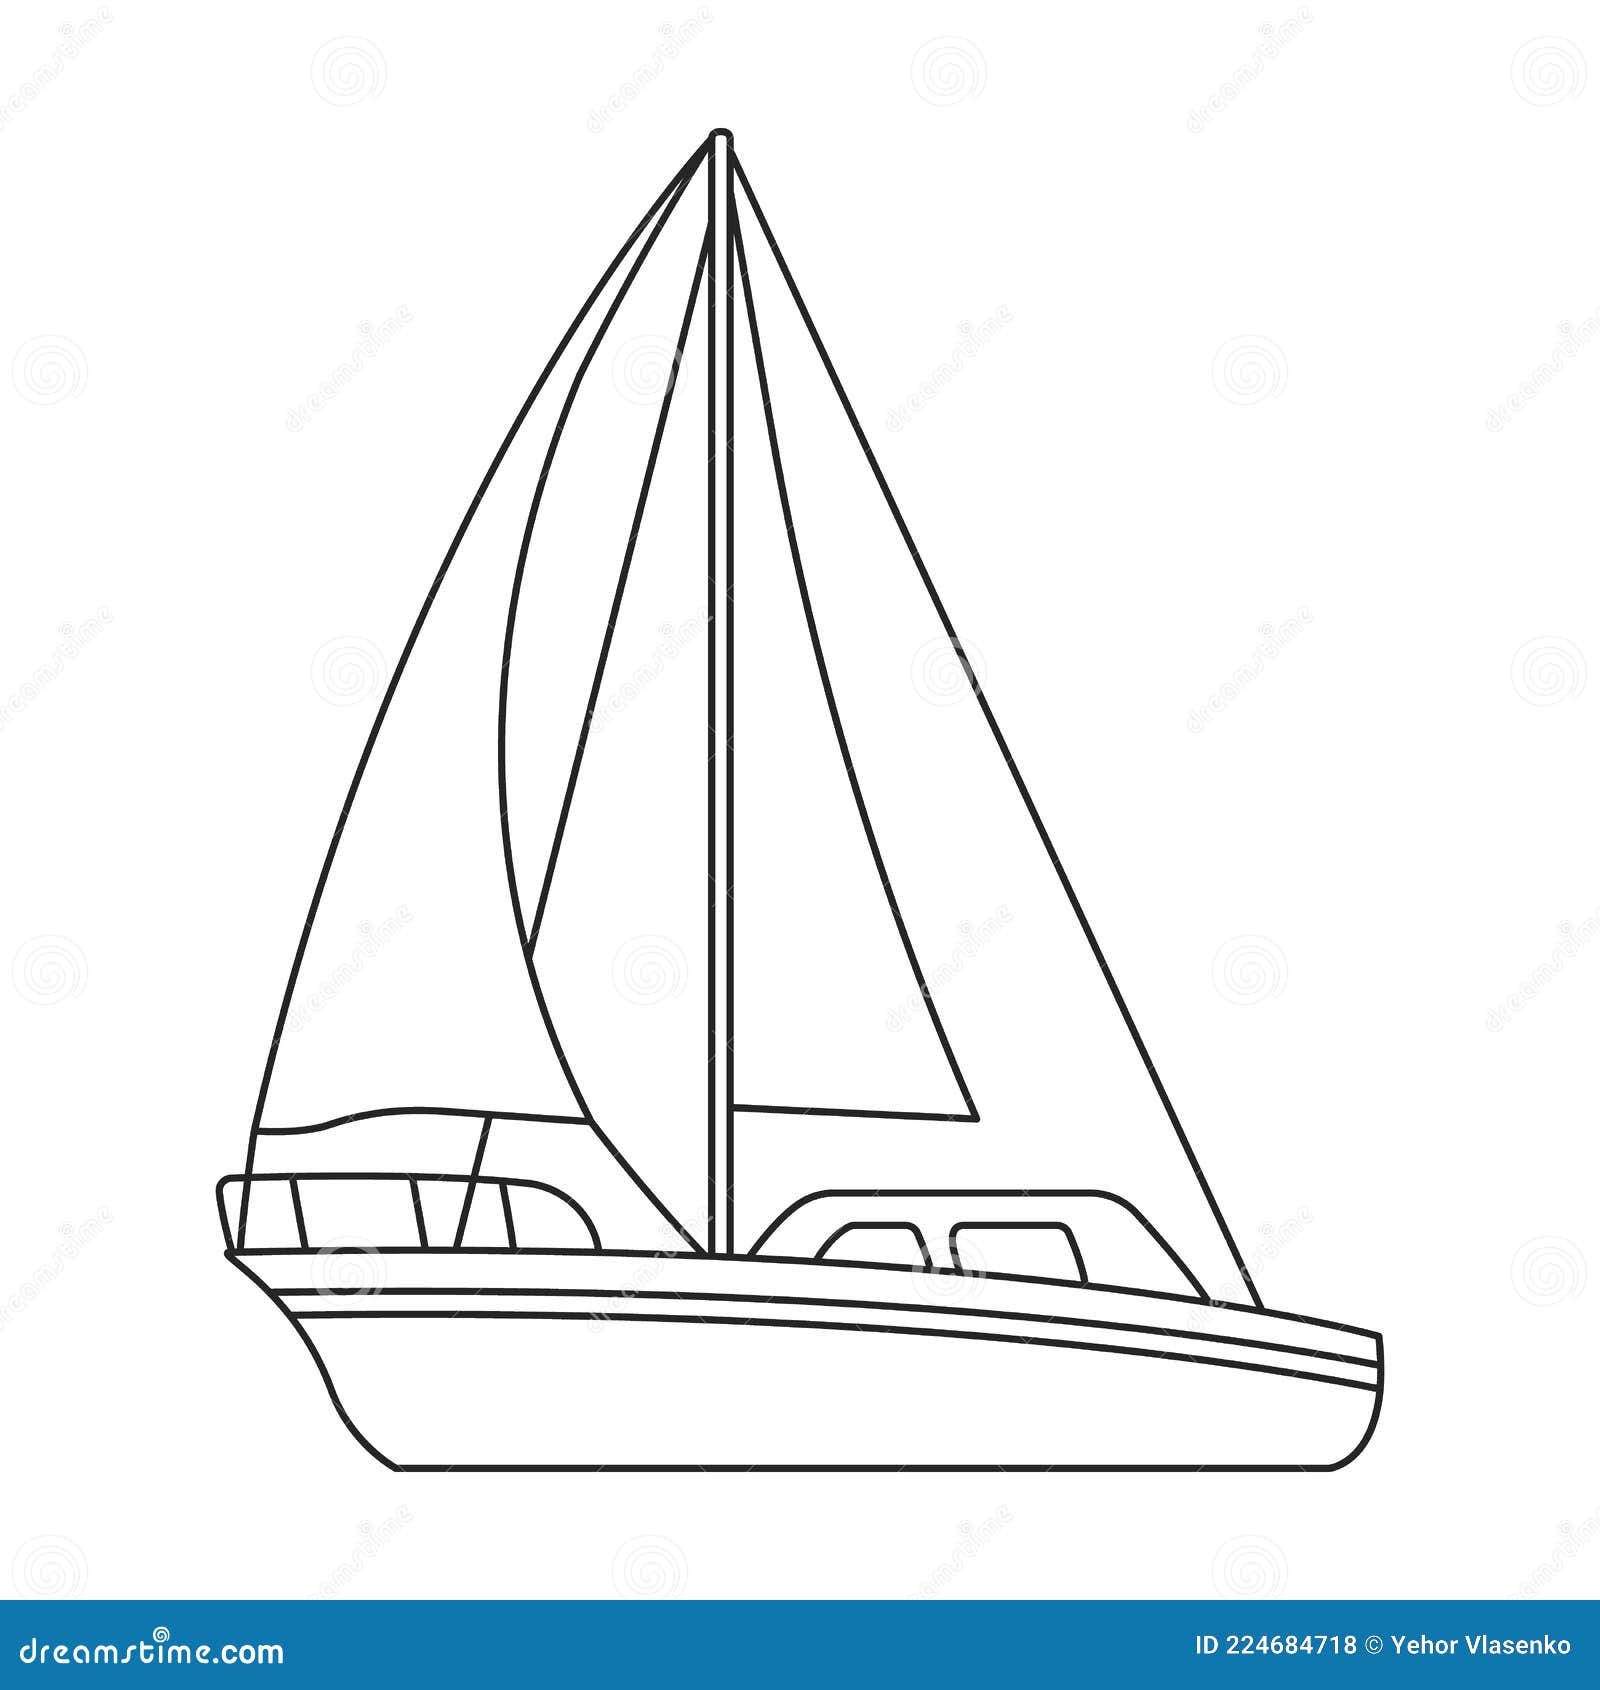 yacht hull outline